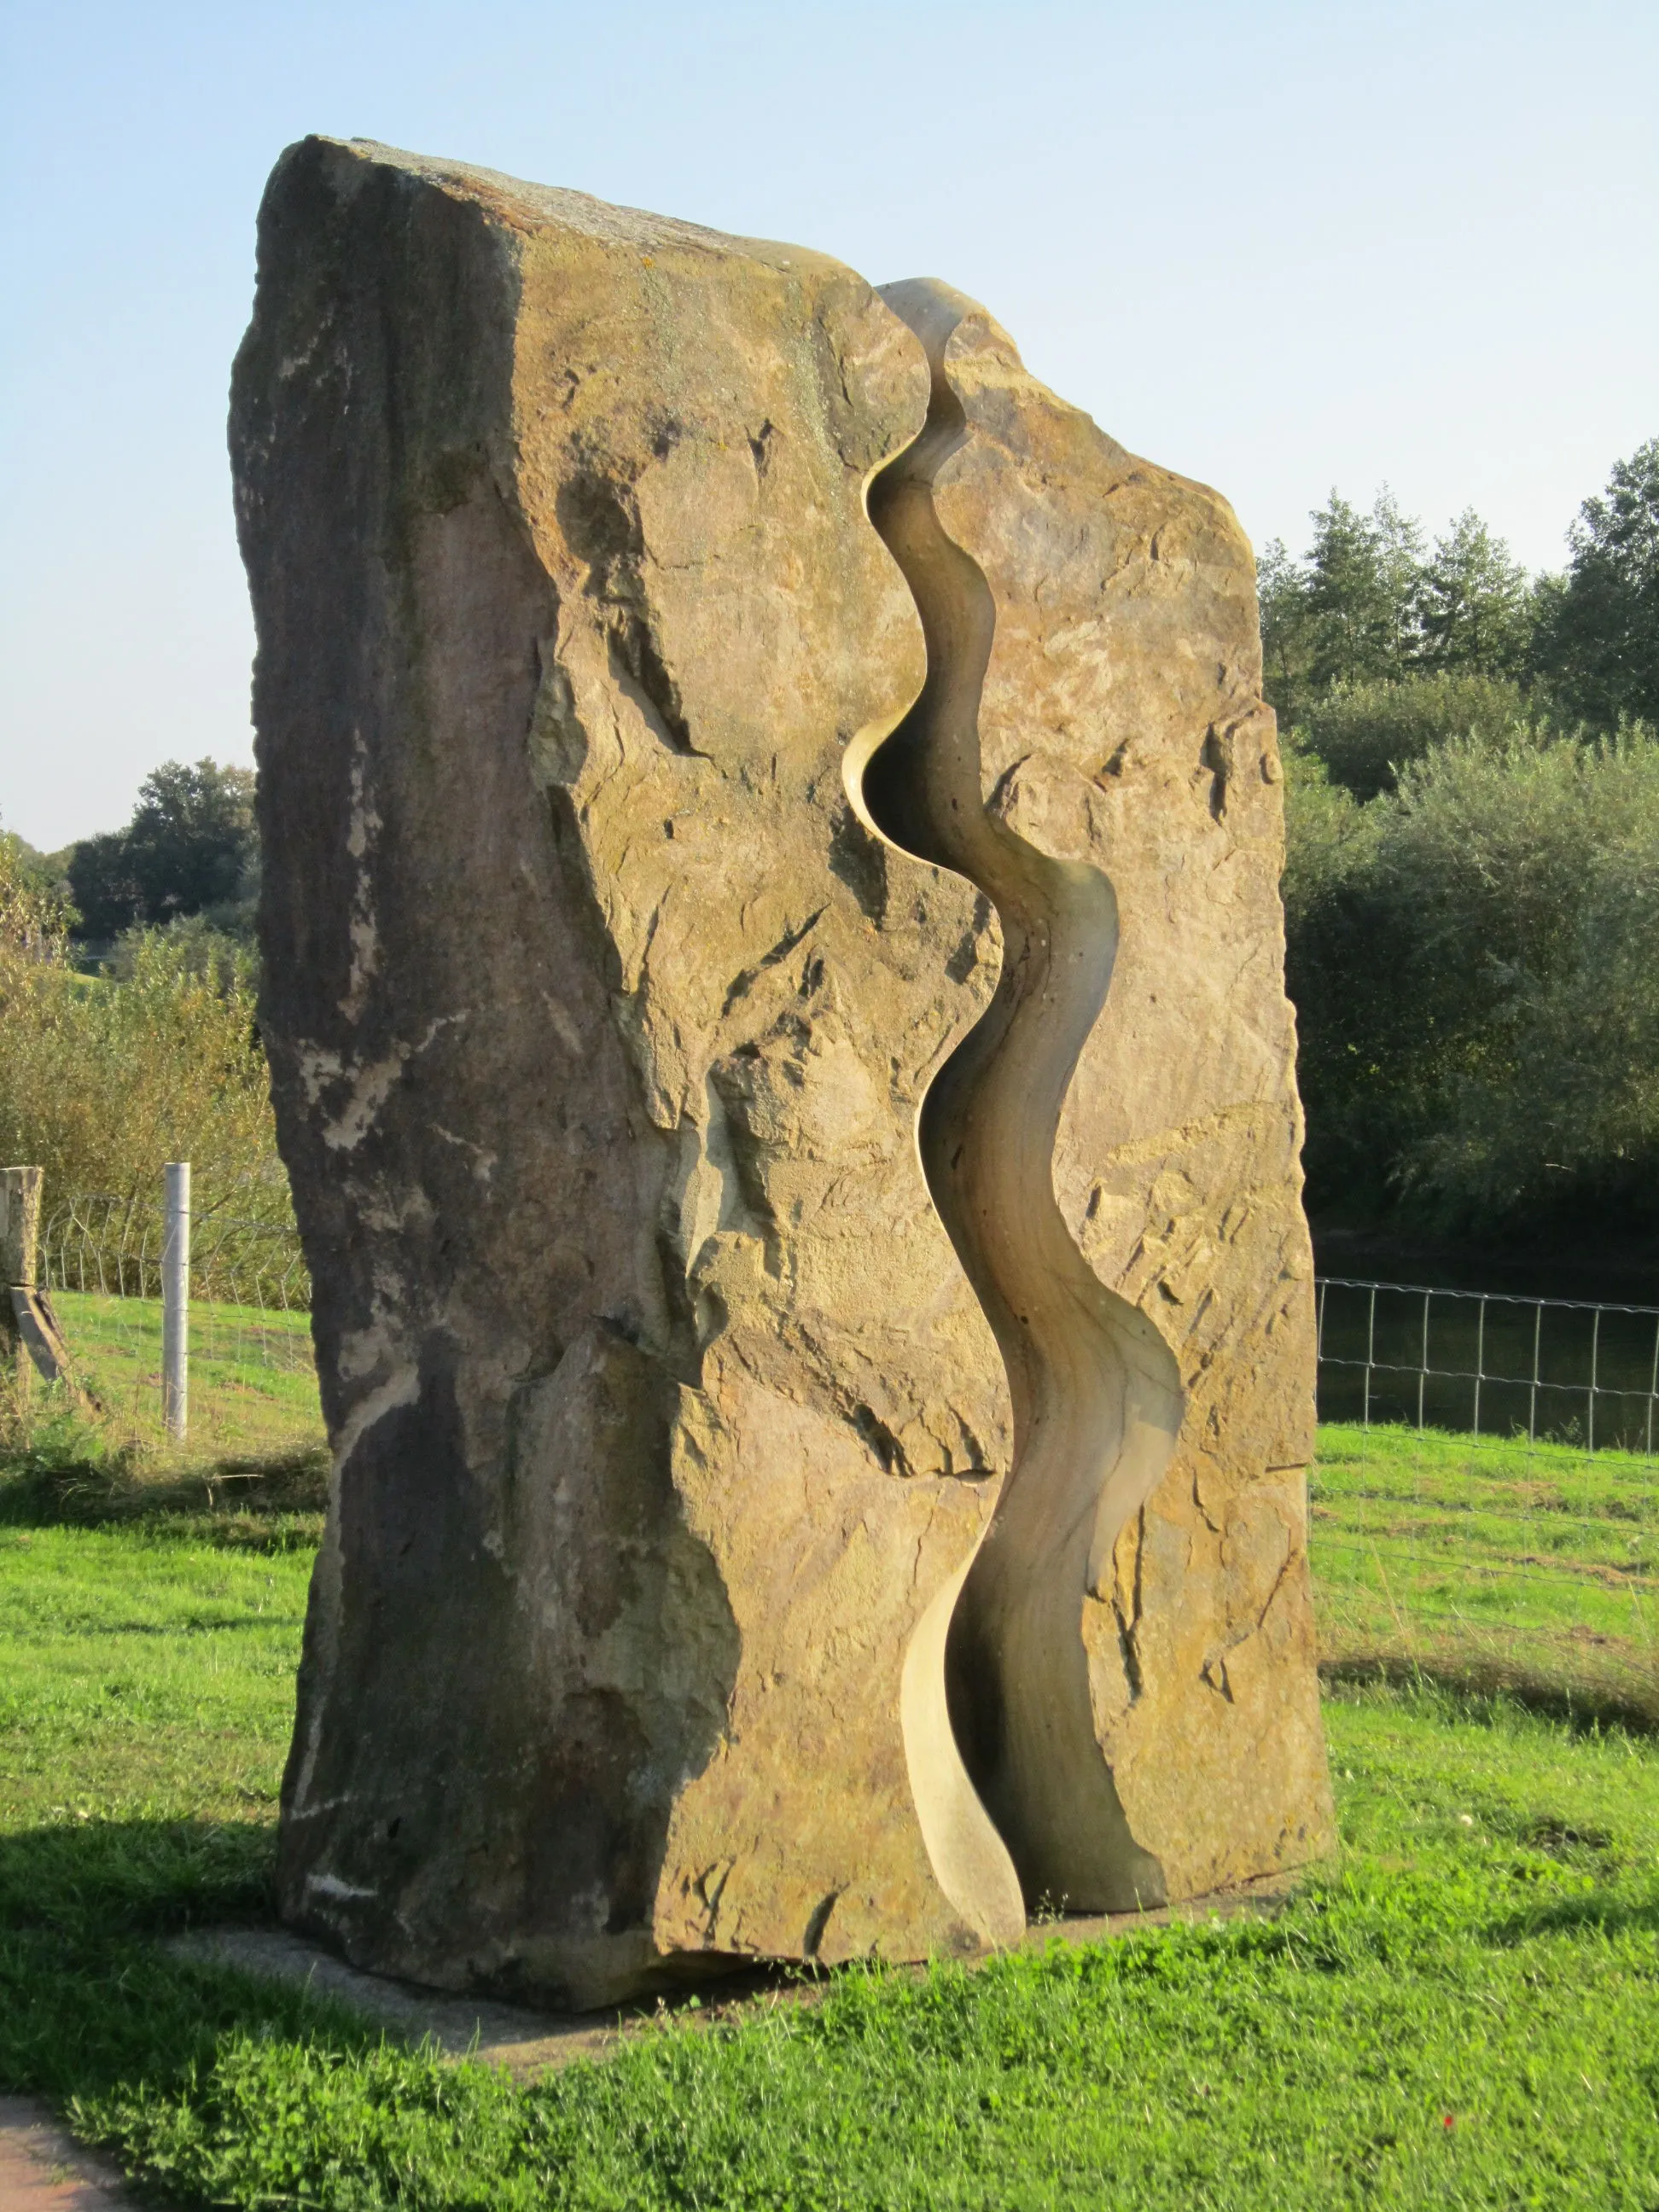 Photo showing: Sculpture "im fluss" ("in the river" or "flowing") on the bank of the Lager Hase near Essen in Oldenburg by Regine Meyer zu Strohe